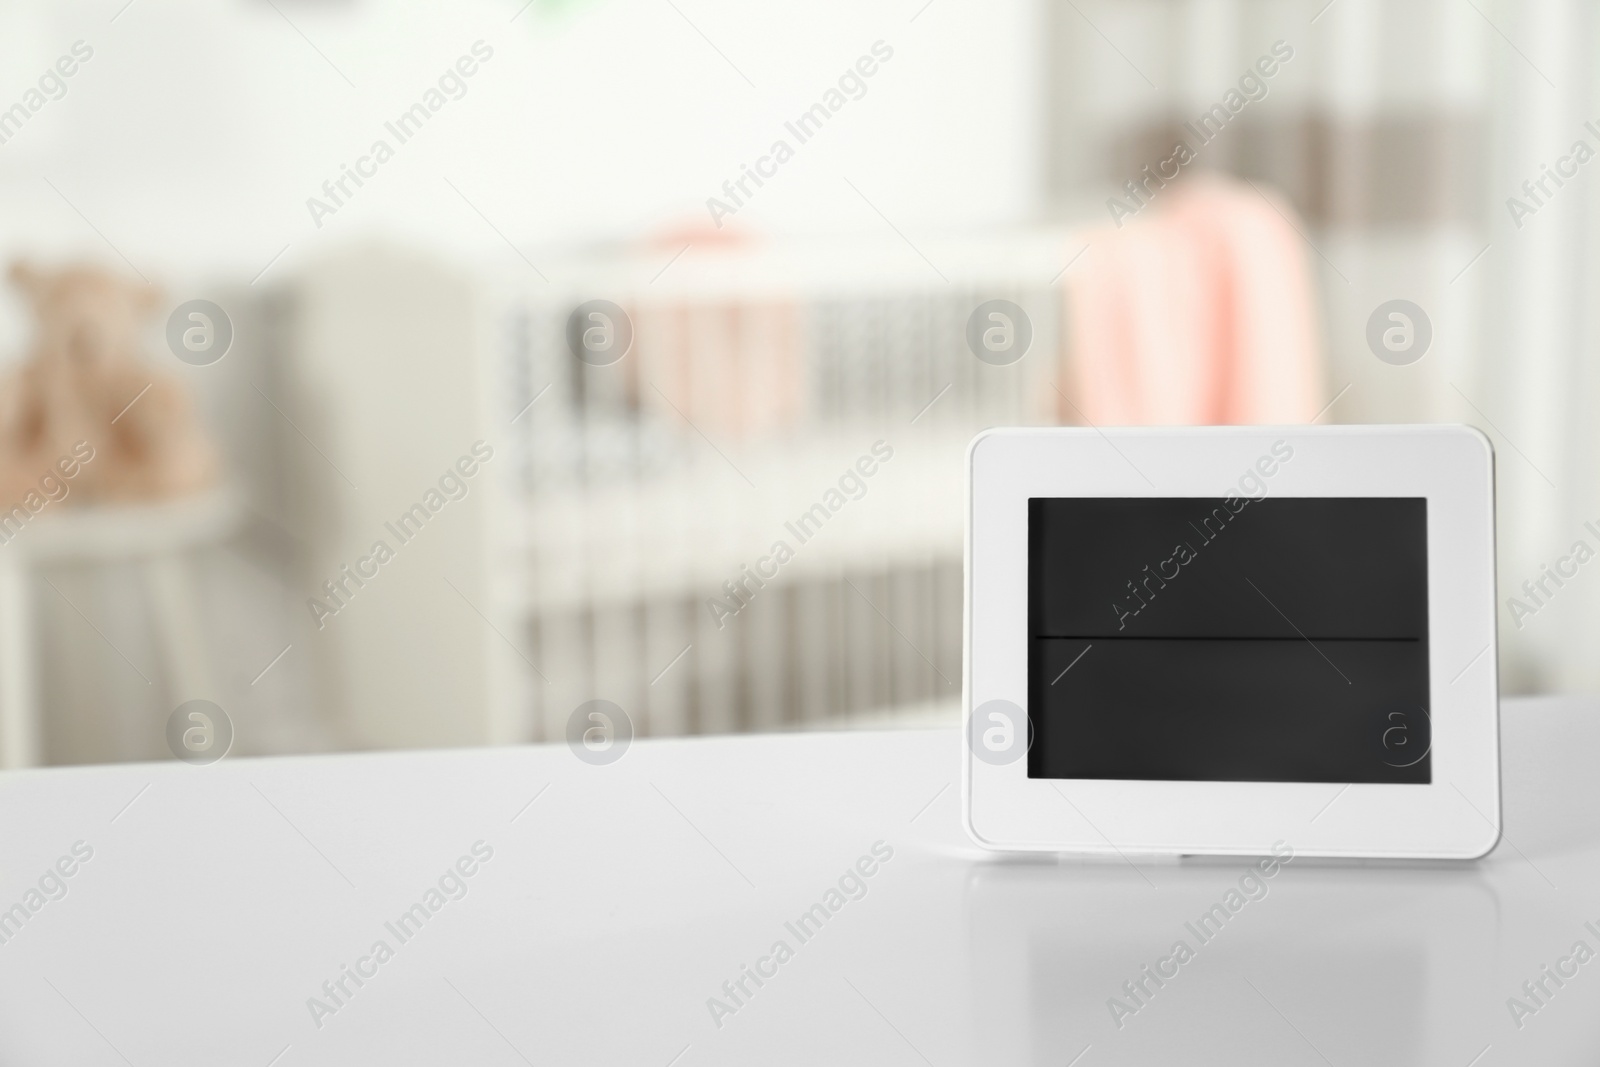 Photo of Digital temperature and humidity control in baby room interior. Space for text